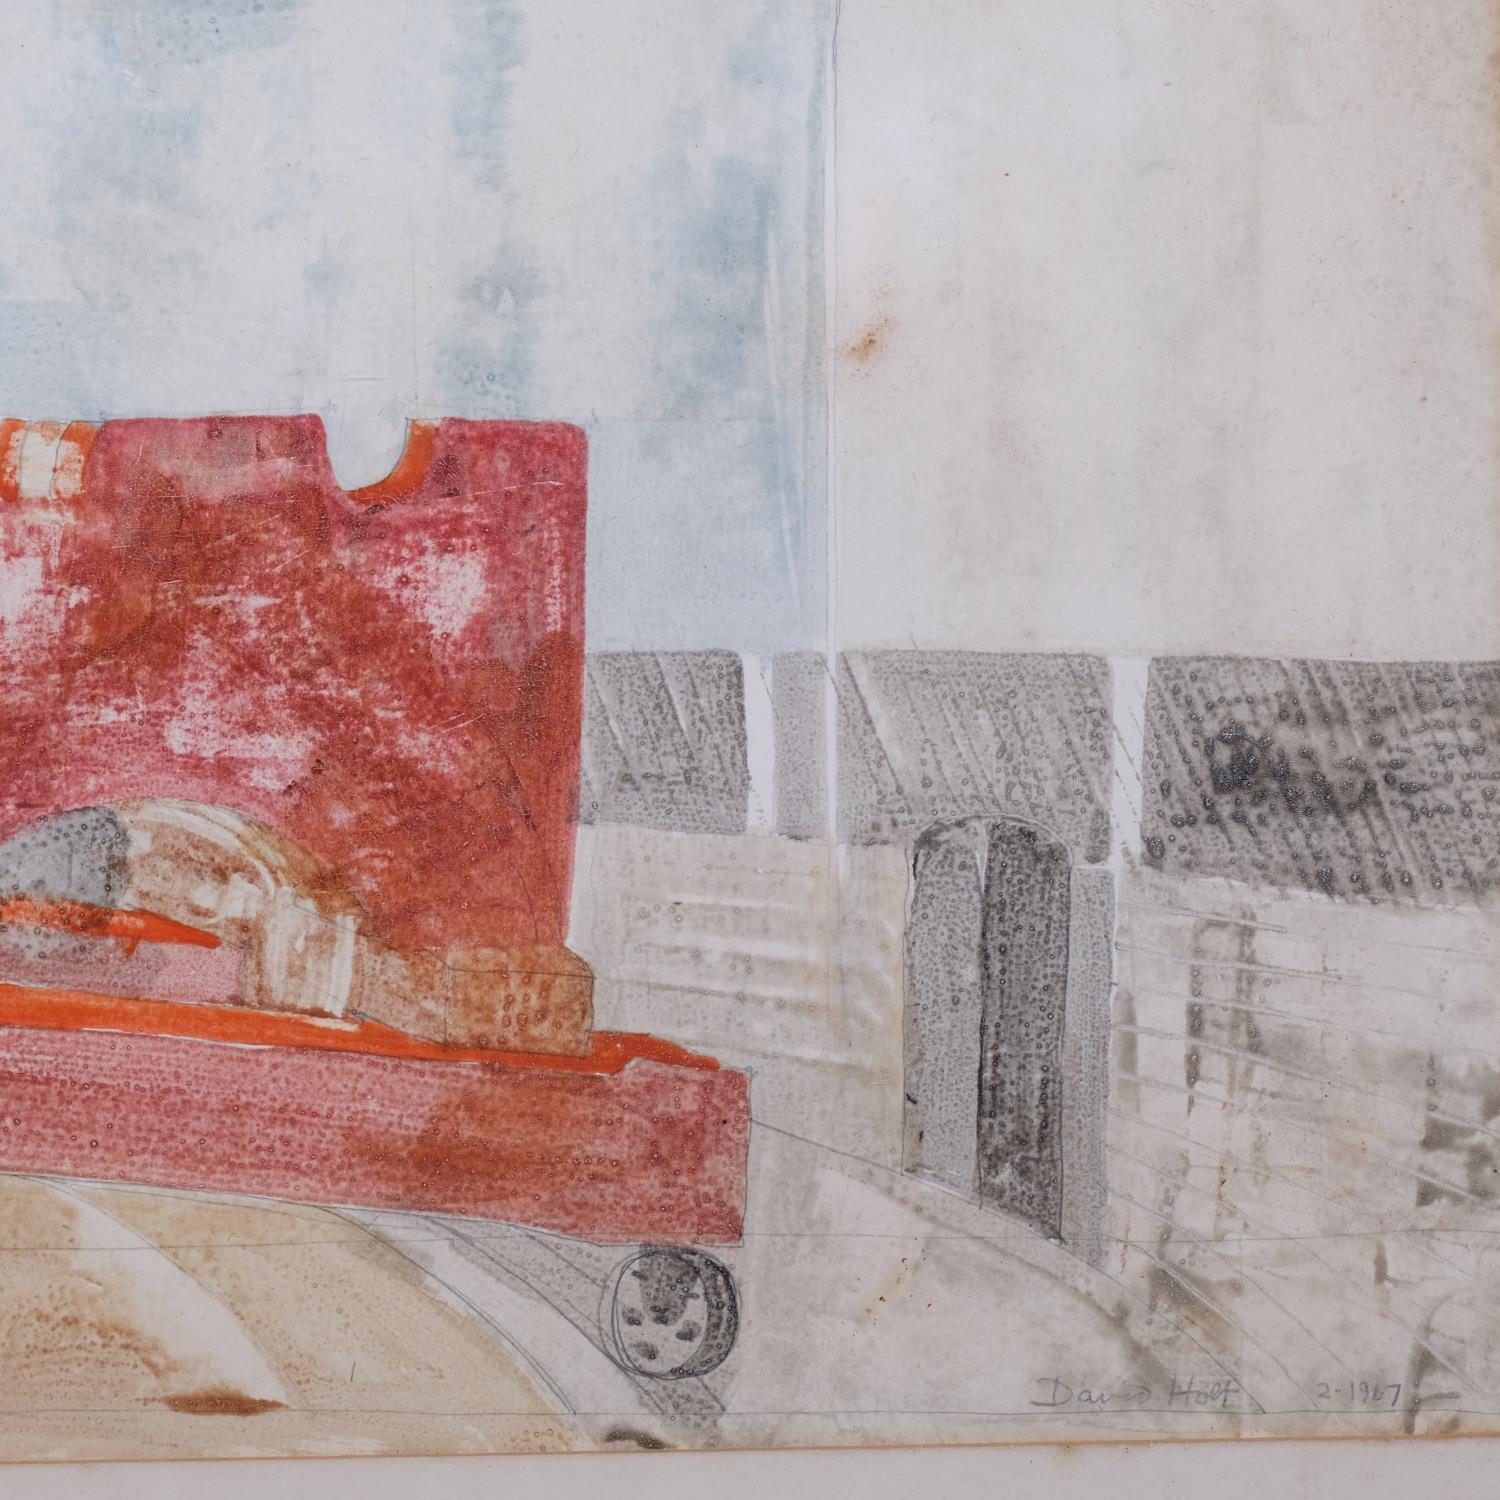 David Holt, abstract composition, mid-20th century watercolour, signed and dated 1967, 30cm x - Image 3 of 4